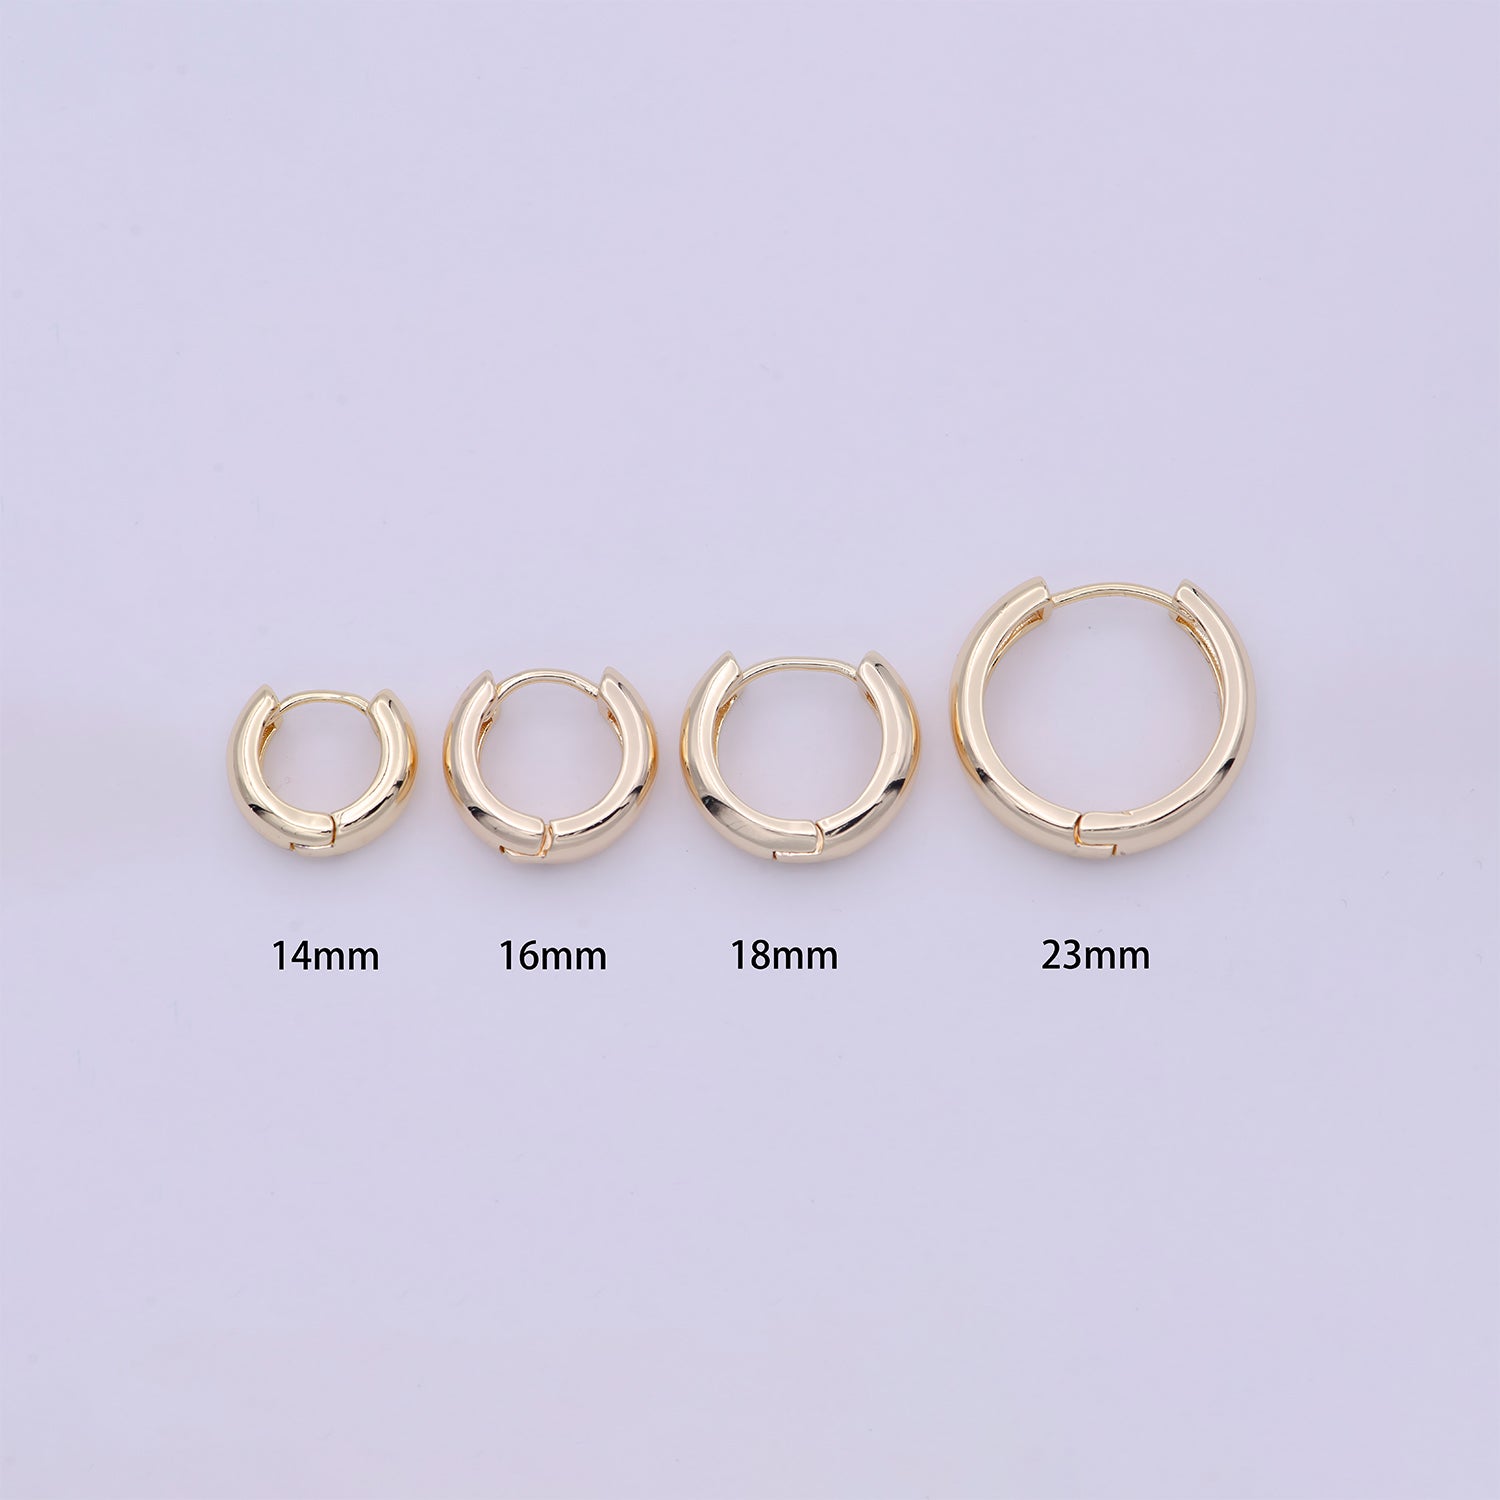 1 Pair 14K Gold Filled Small Lever Back Hoop Earrings 14mm, 16mm, 18mm ,23mm Earring Hypoallergenic Jewelry - DLUXCA